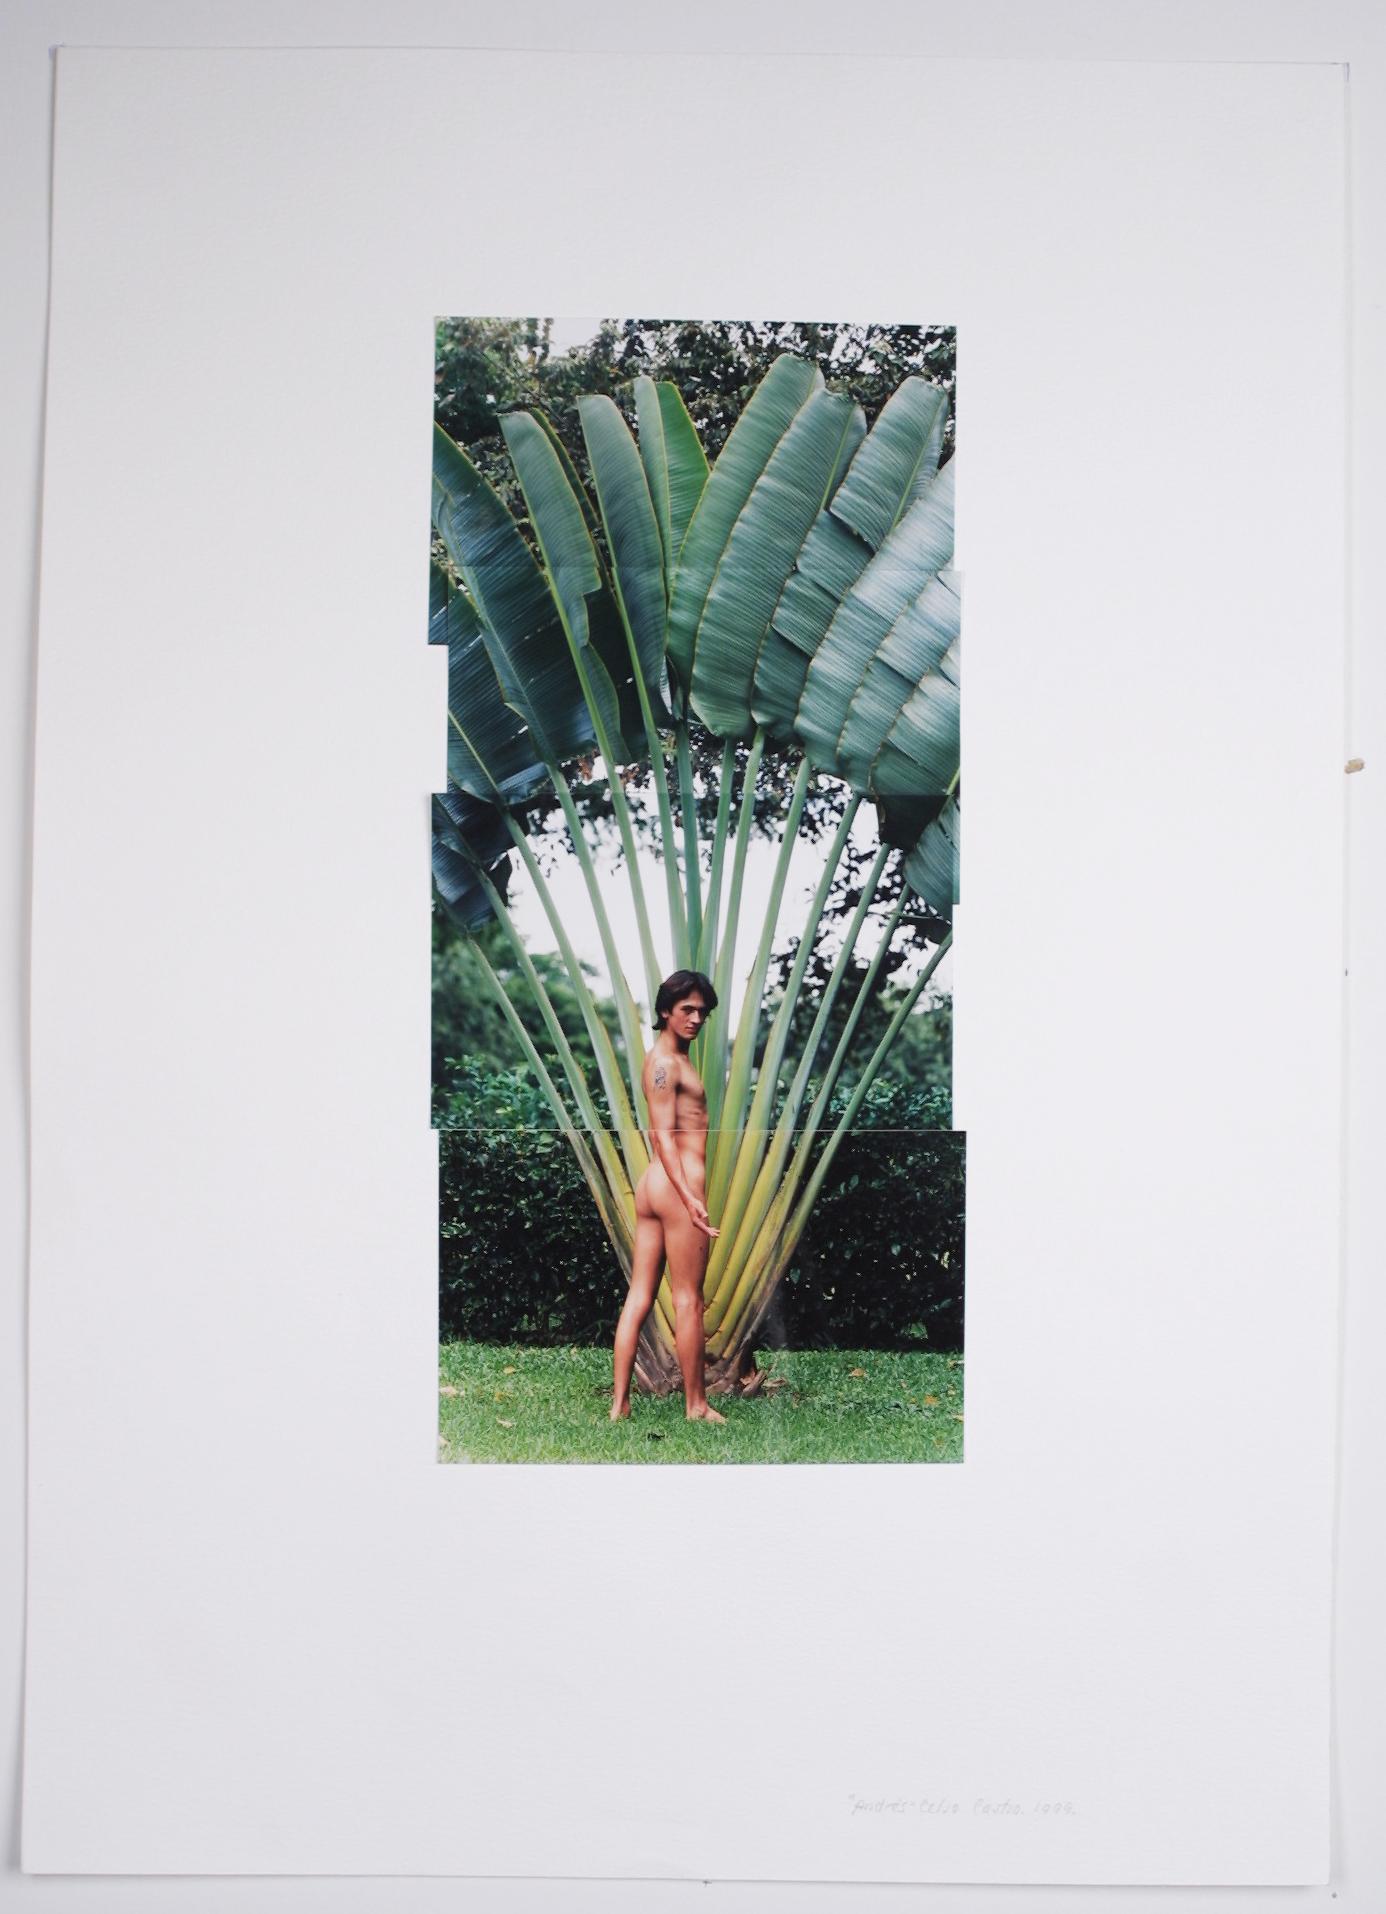 Andrés, 1999 by Celso José Castro Daza
From Identidad series
One-of-a-kind Photo collage
Sheet Size: 27 in. H x 20 in. W
Unframed

The root of these unique photographic works by the artist Celso Castro occurred when the artist returned from Italy to